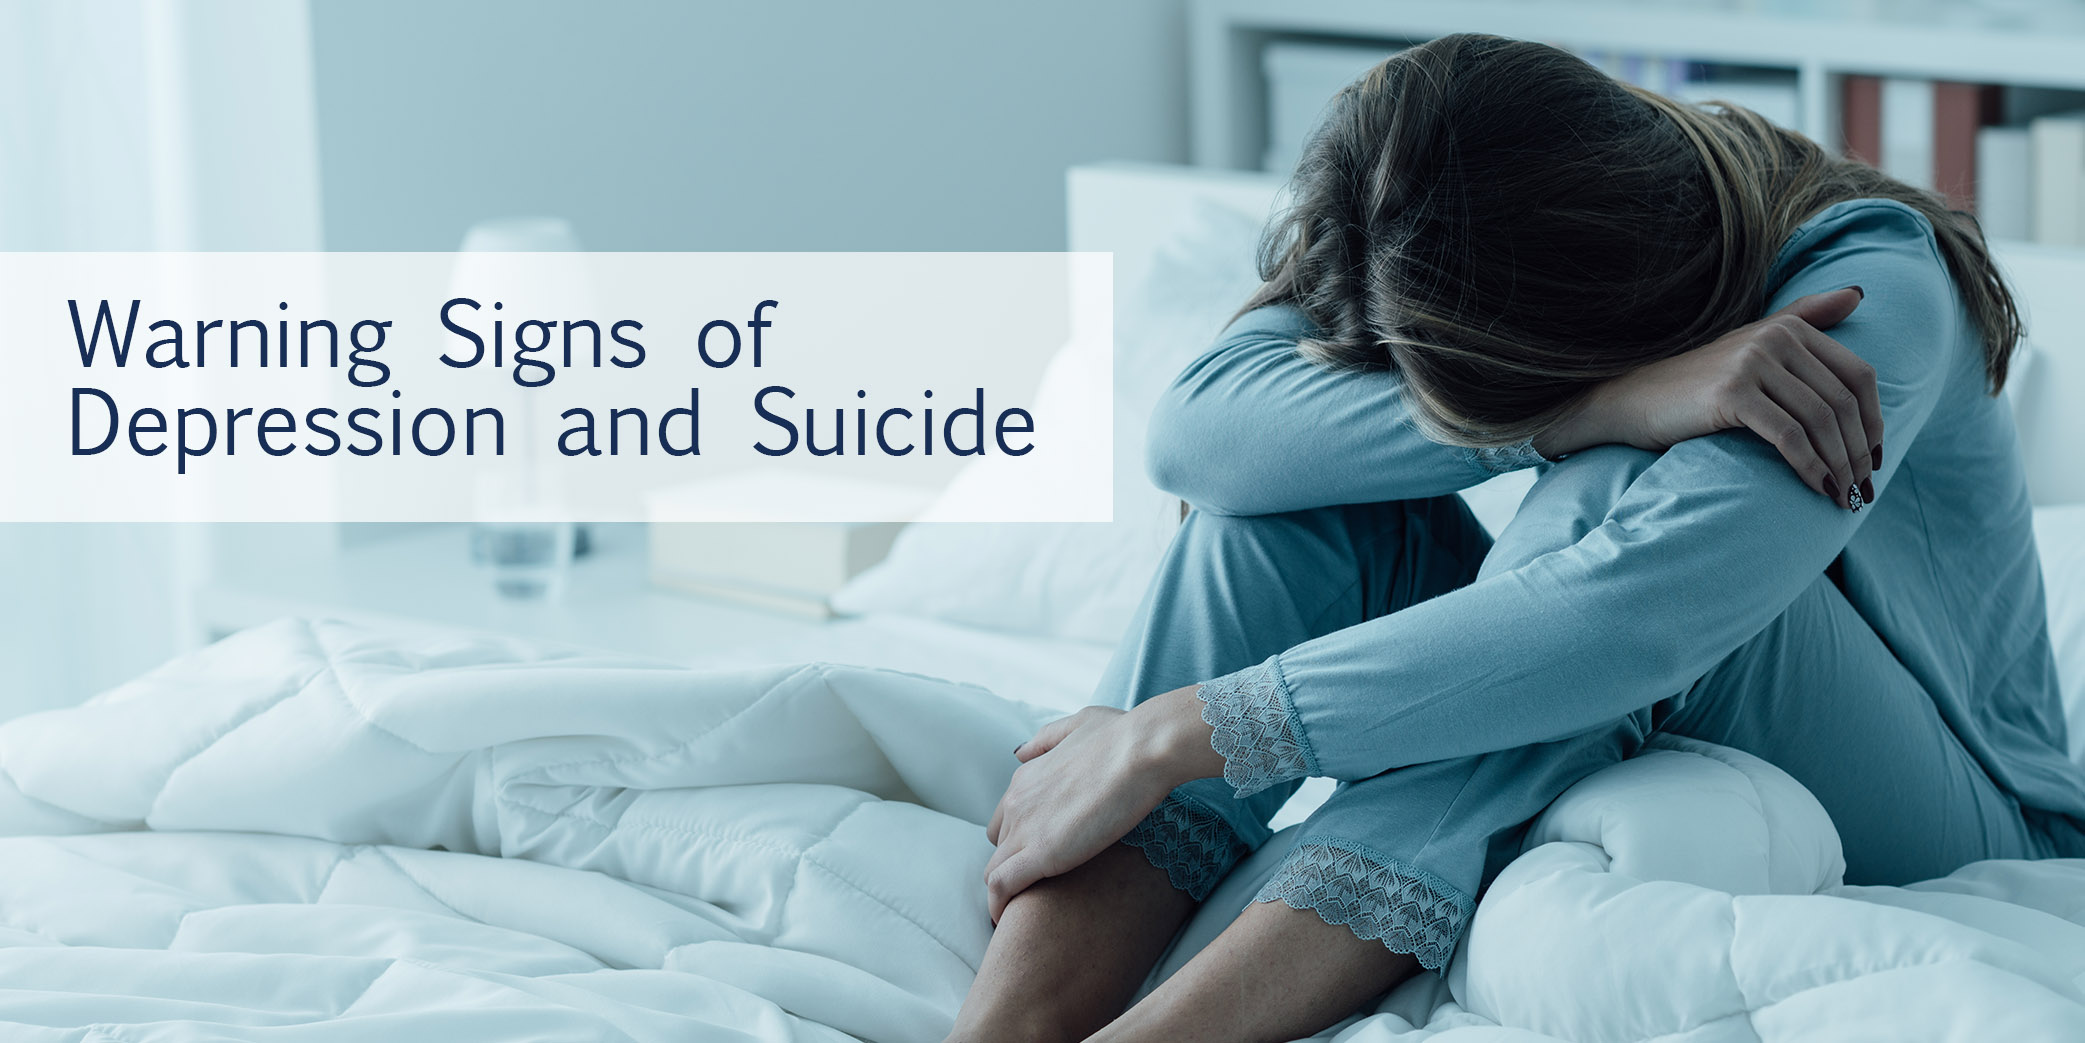 Warning Signs of Depression and Suicide